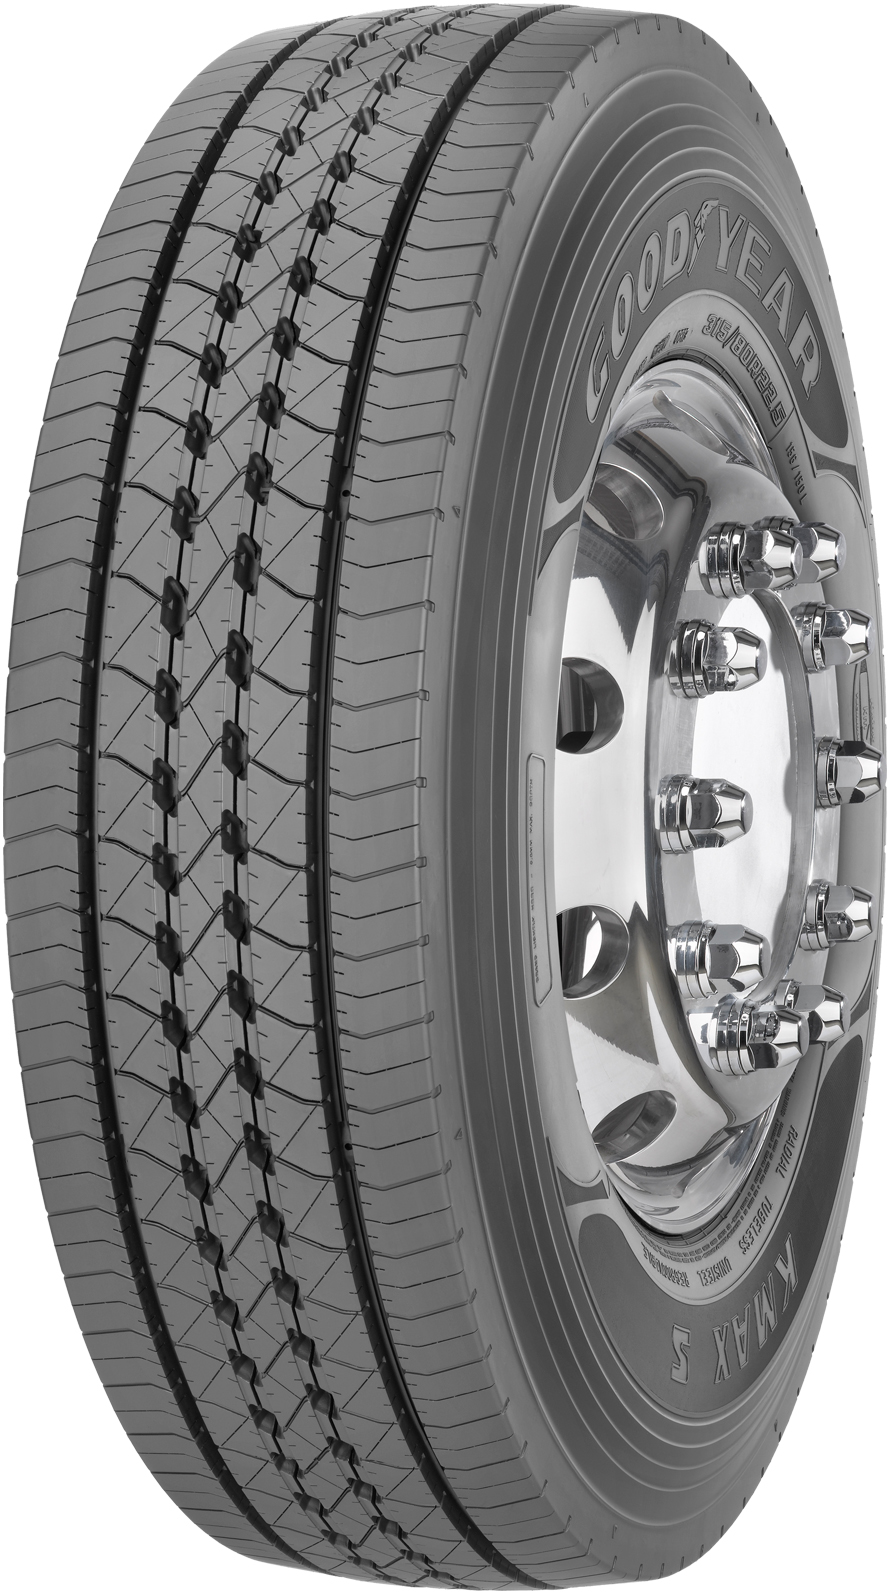 product_type-heavy_tires GOODYEAR KMAX S 12 TL 225/75 R17.5 129M